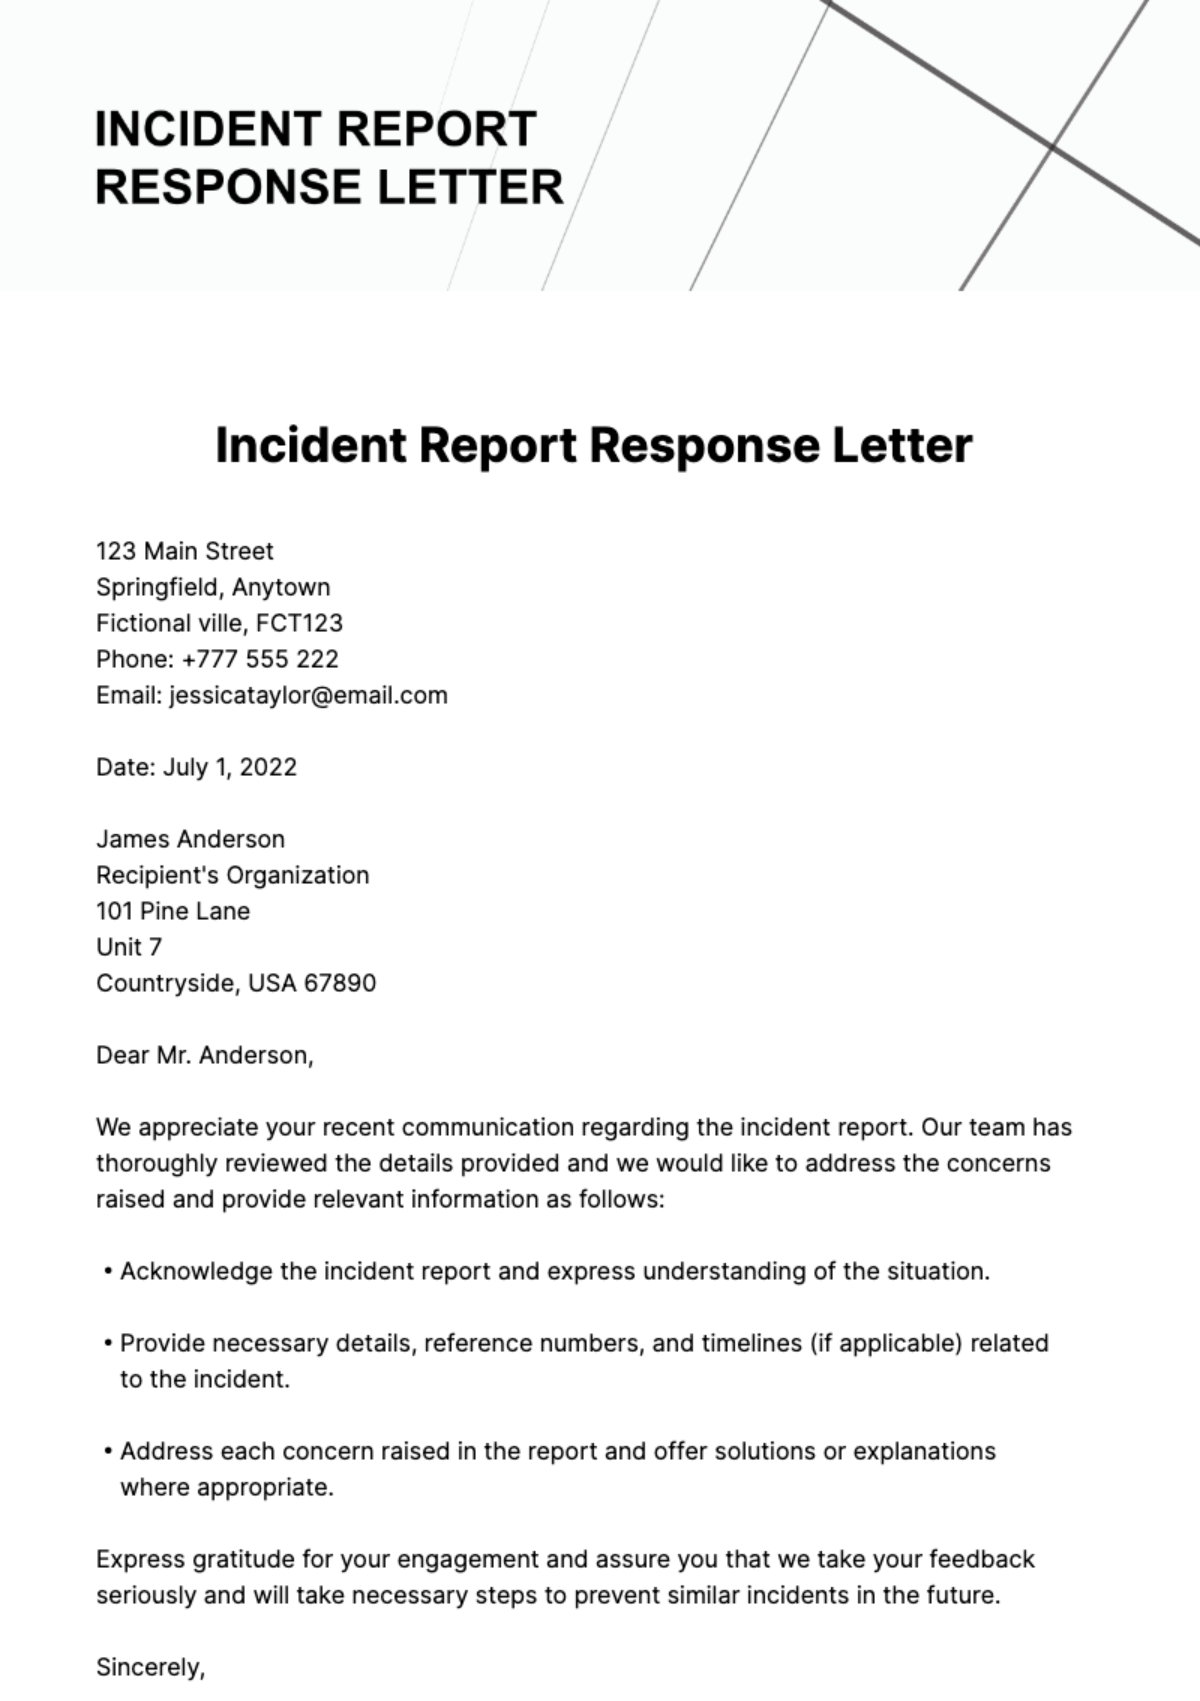 Free Incident Report Response Letter Template